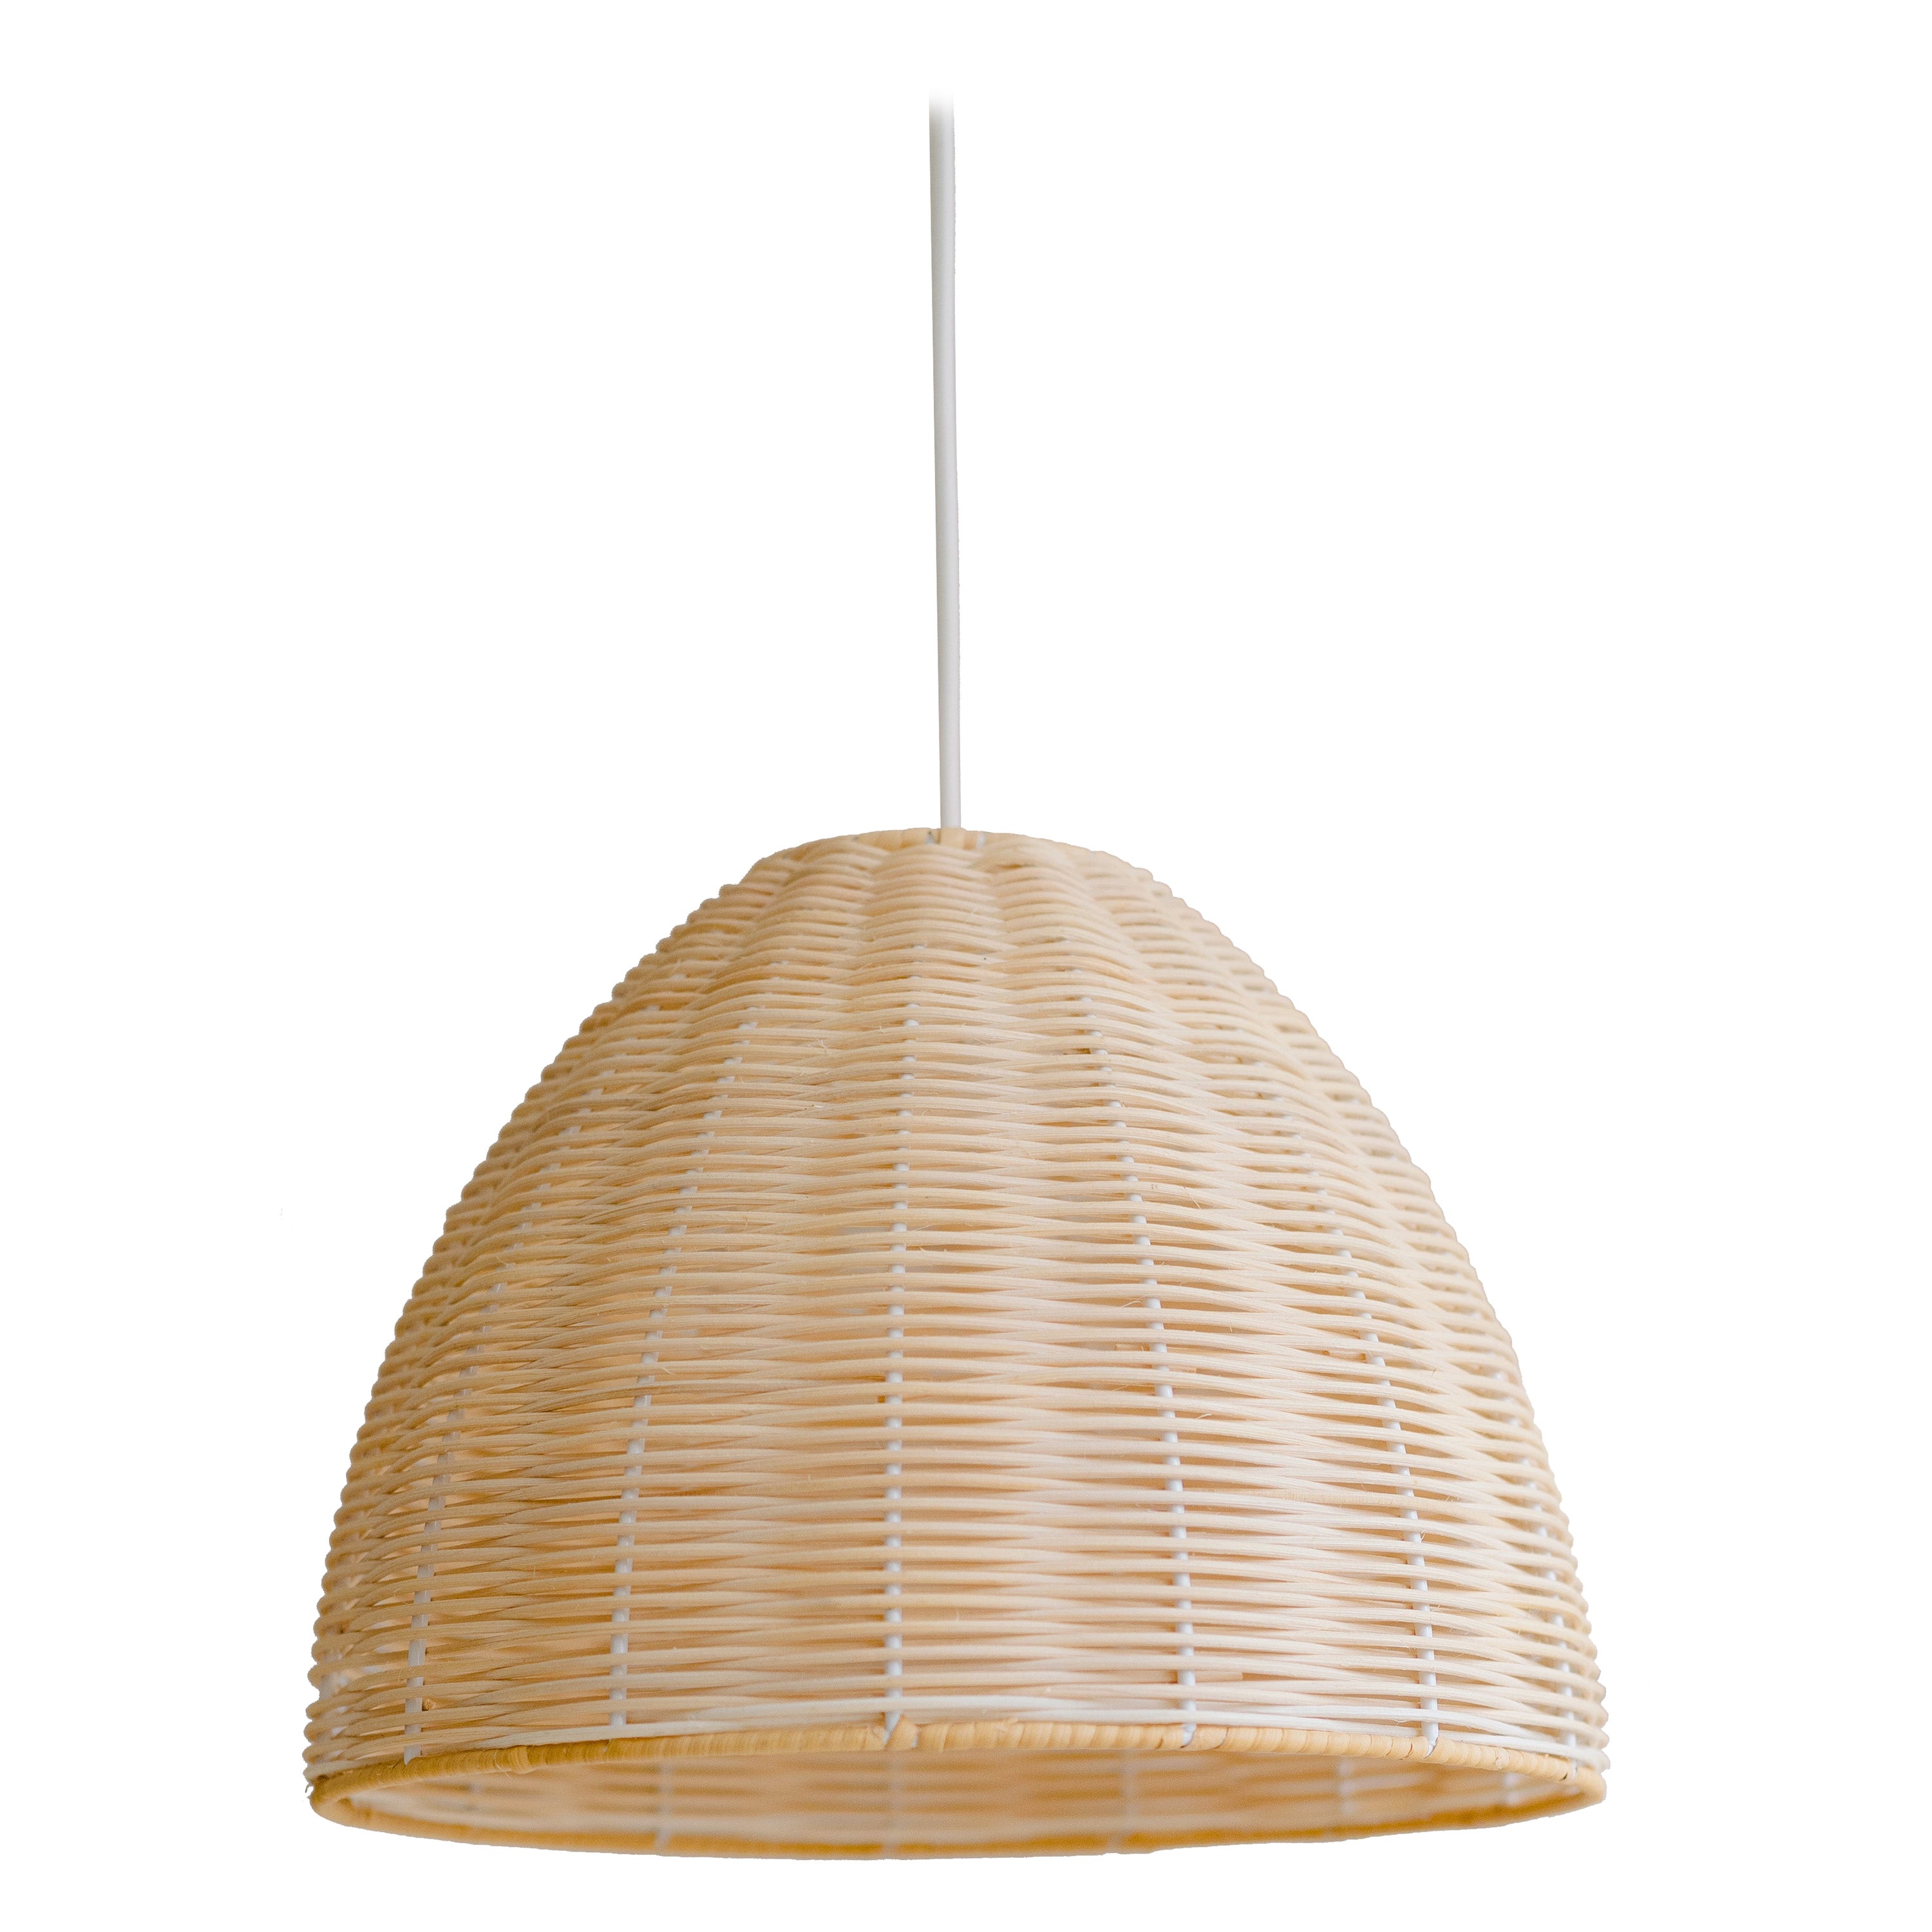 Contemporary, Handmade, Suspension Lamp, Rattan Dome, by Mediterranean Objects